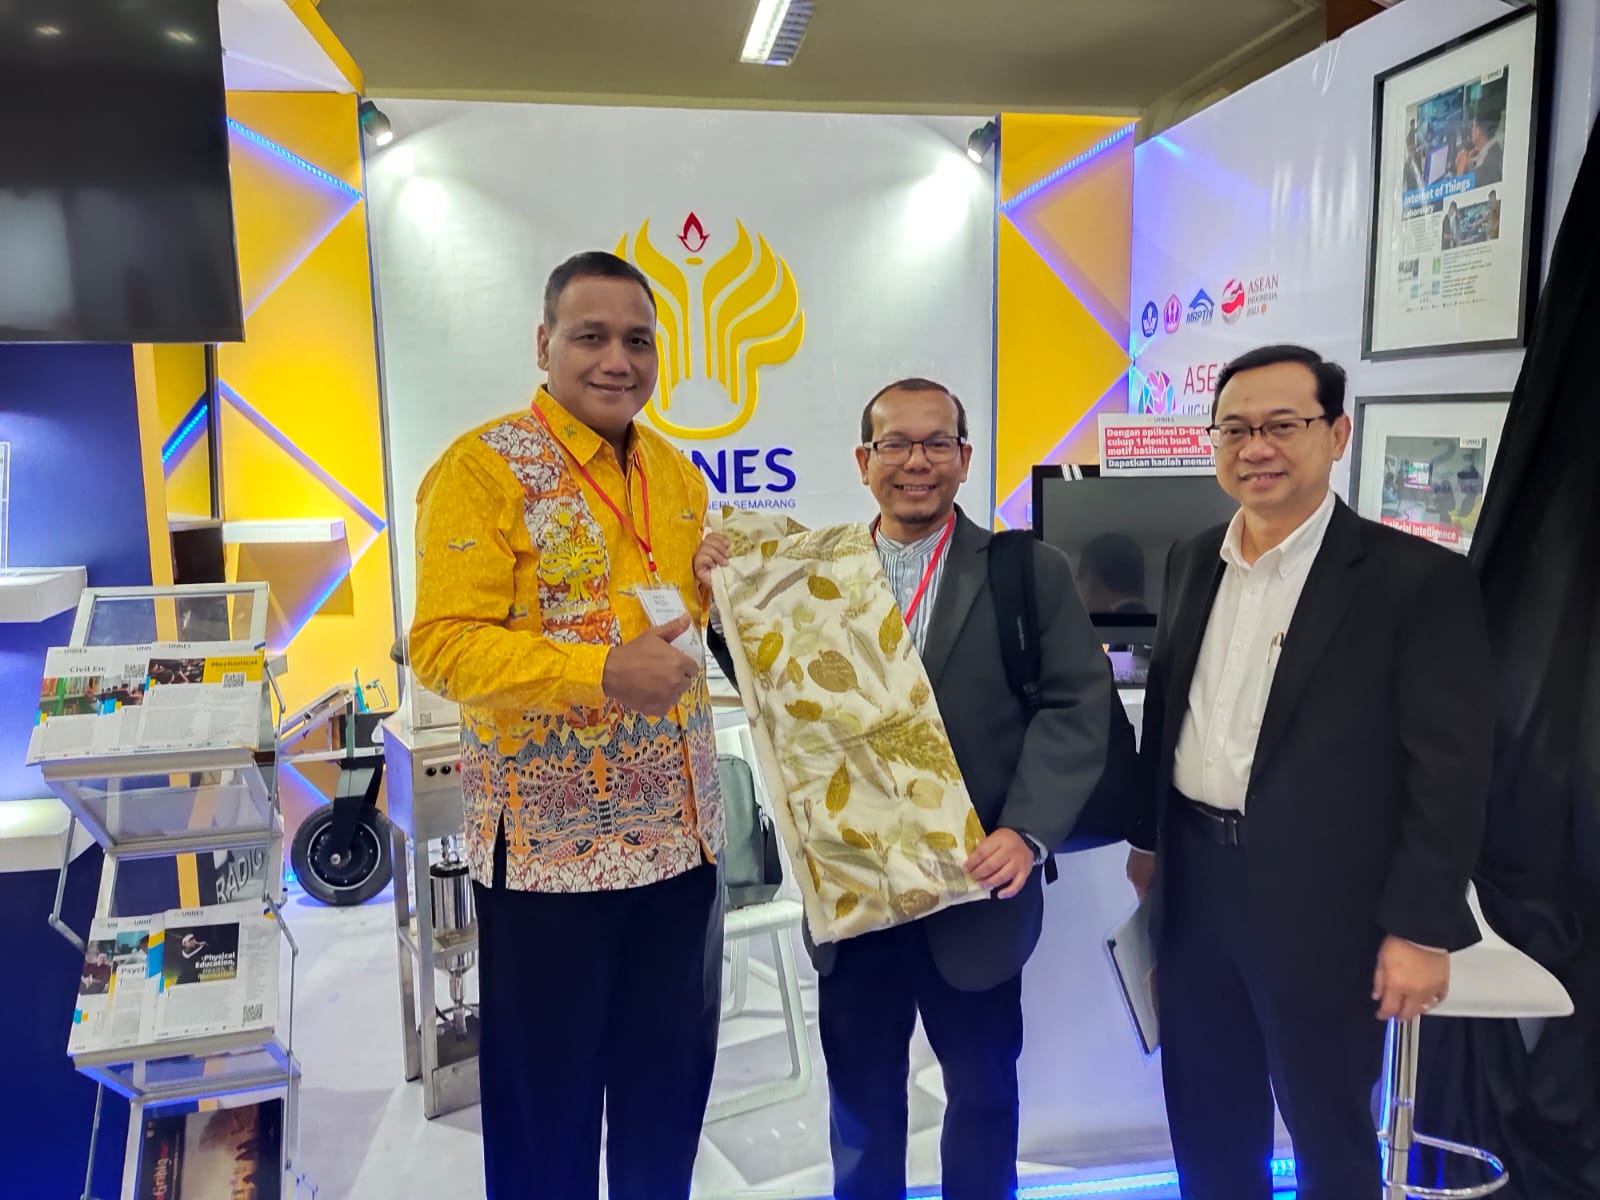 UNNES received two awards at the 2023 AHEC (ASEAN Higher Education